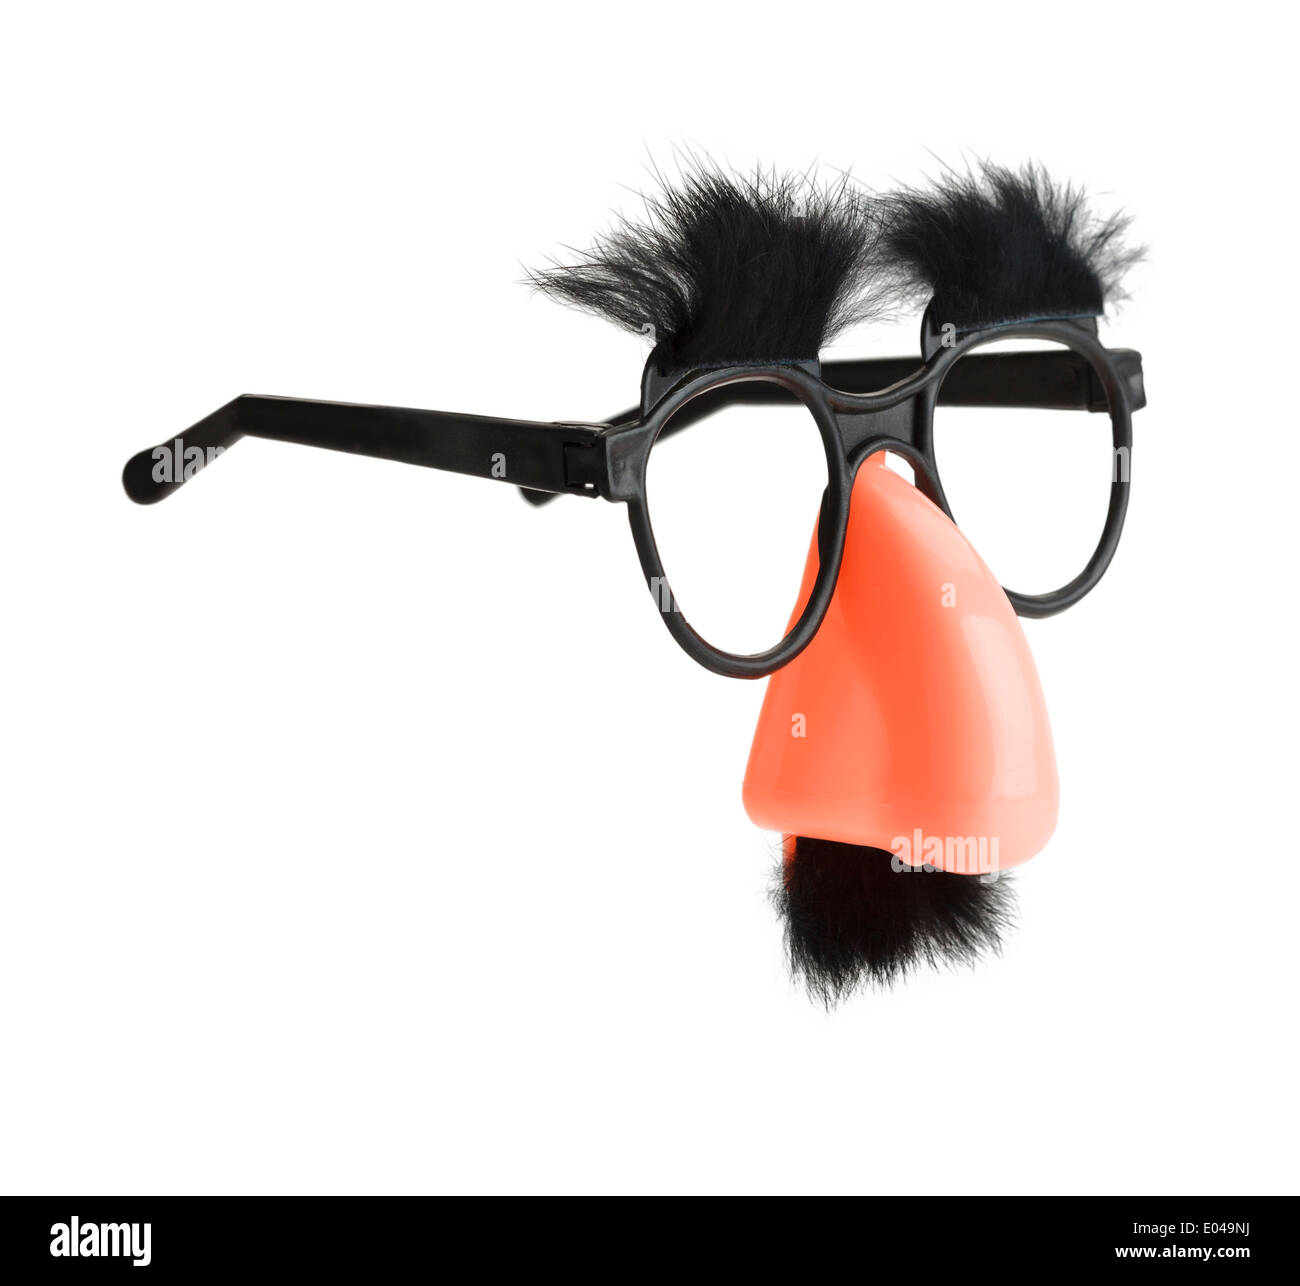 Groucho Marx Disguise with Mustache, Glasses and Nose, Isolated on White Background. Stock Photo